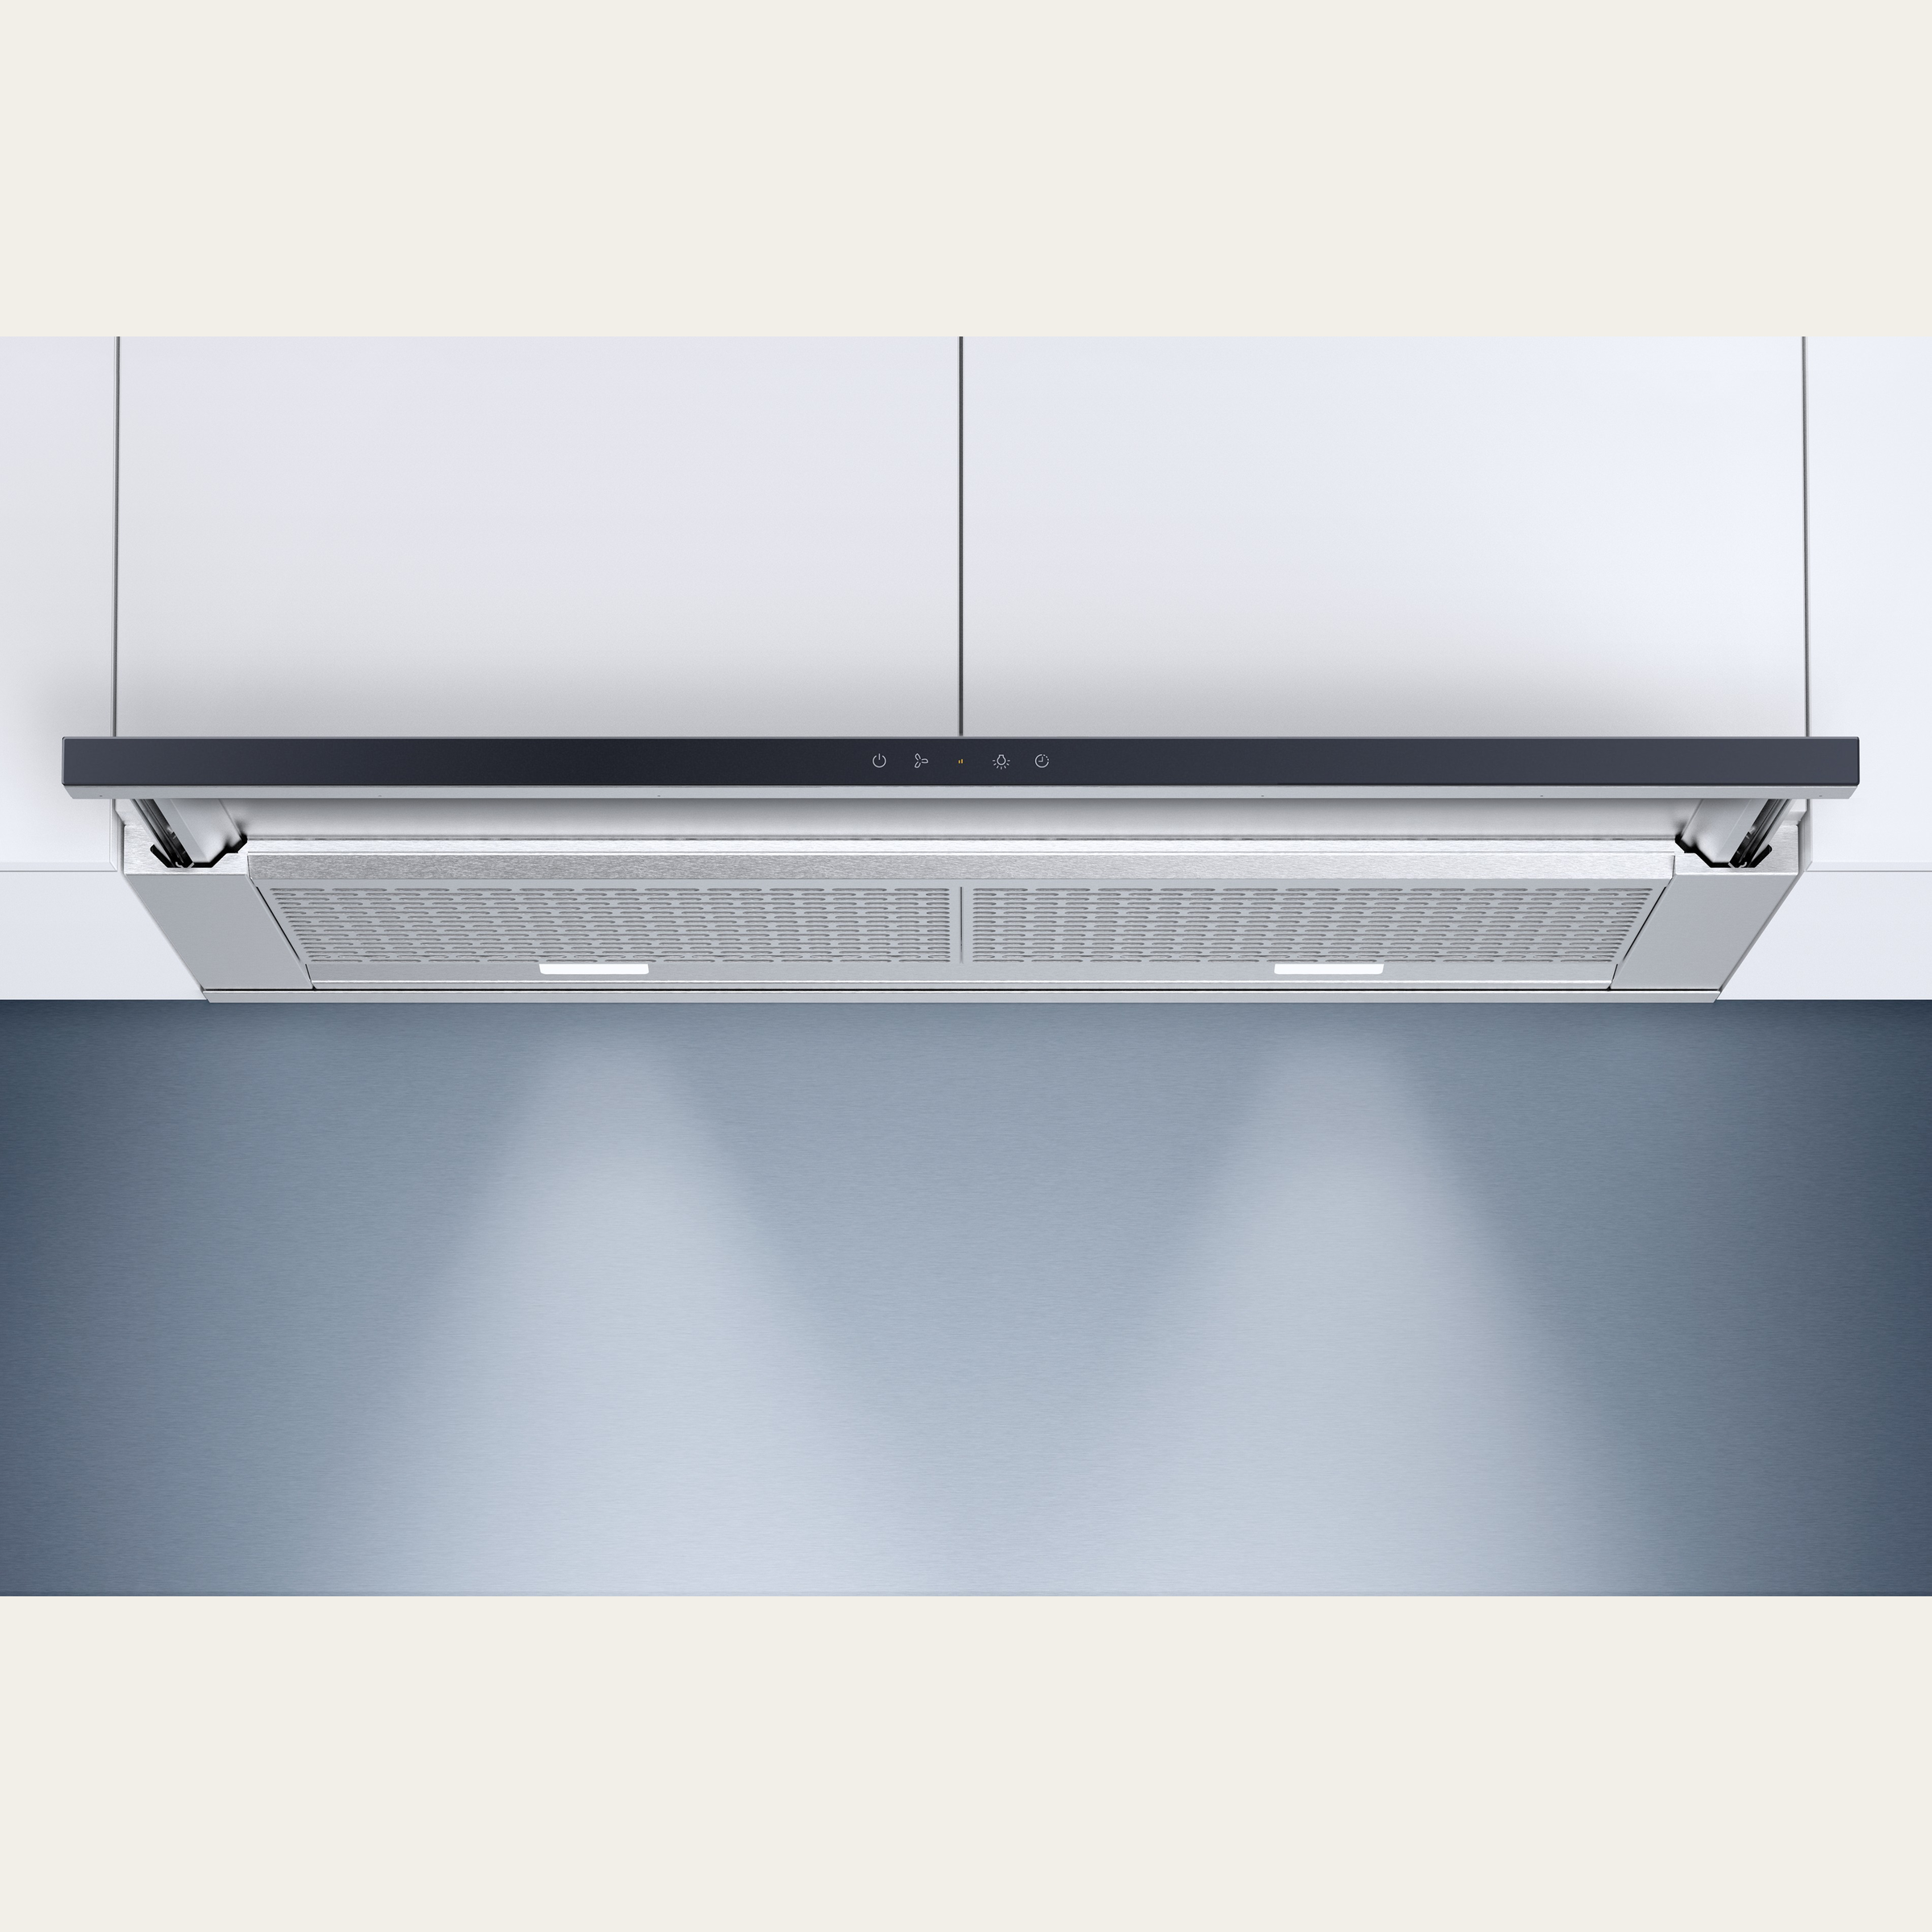 V-ZUG Range hood AiroClearCabinet V4000, Standard width: 60 cm, Black glass, OptiLink, Energy efficiency rating: A+, Extracted air, TouchControl